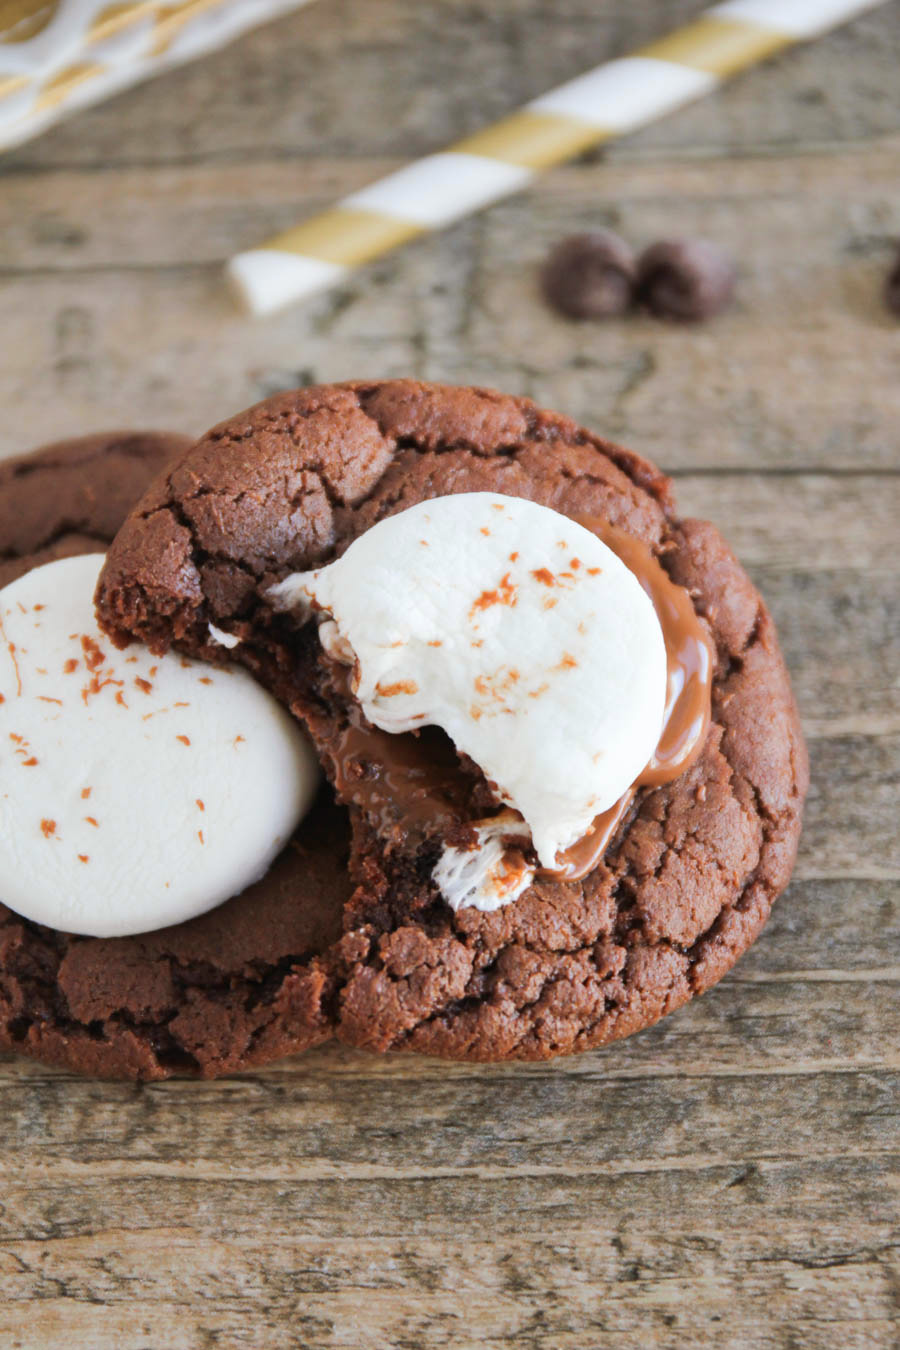 These rich and gooey hot cocoa cookies are the perfect treat for a cold day!